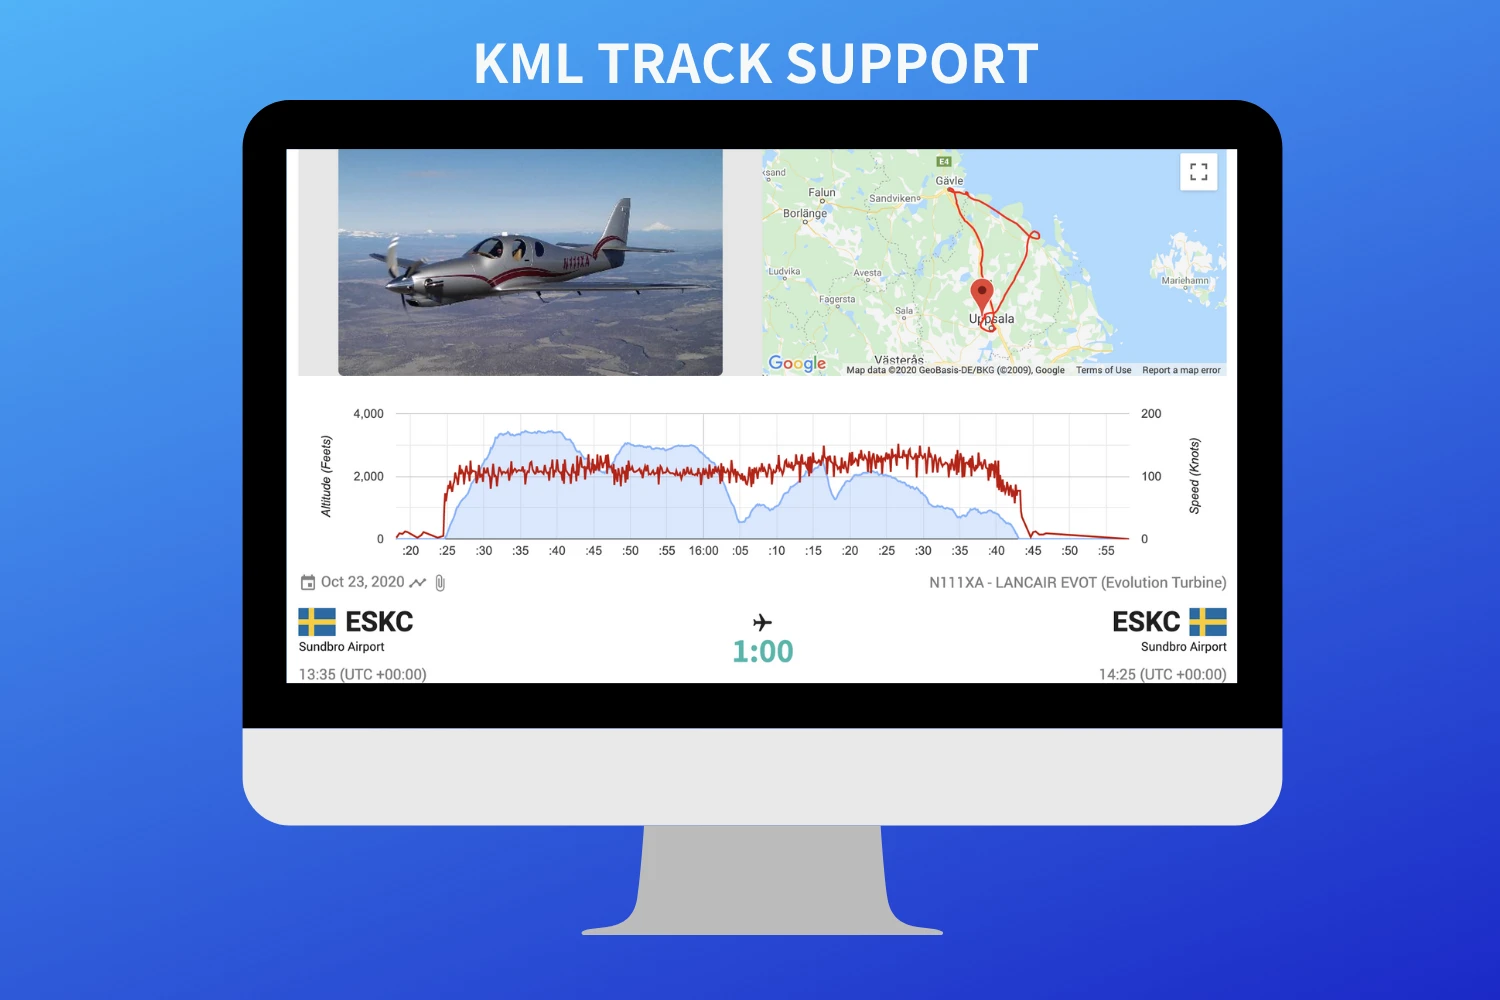 KML track support